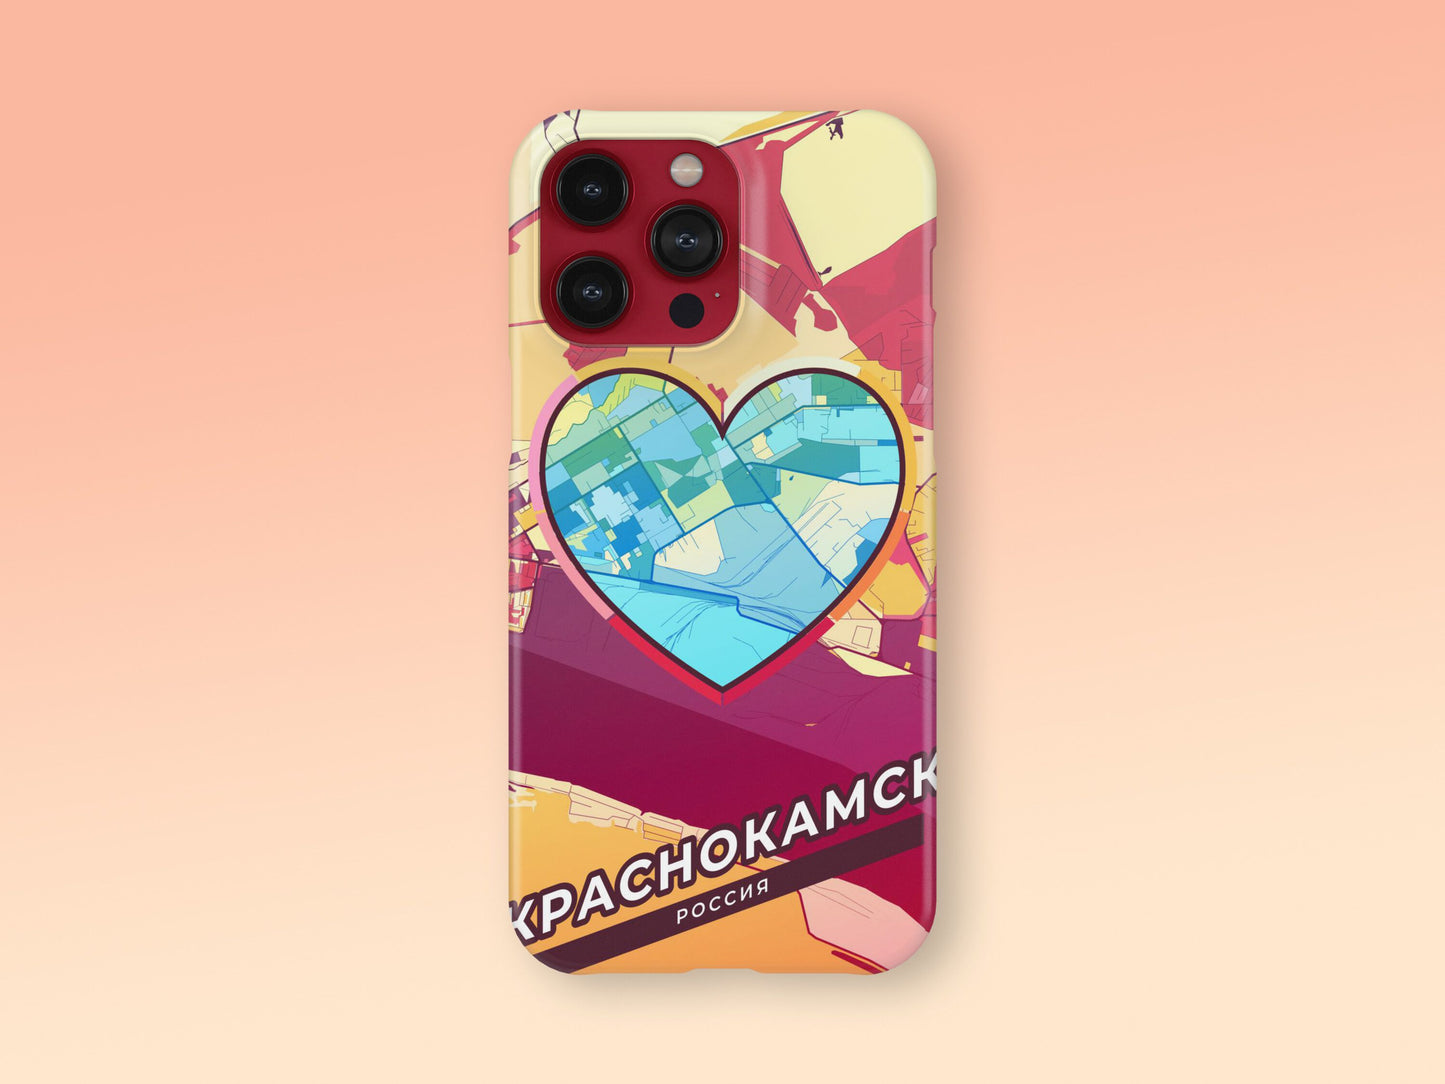 Krasnokamsk Russia slim phone case with colorful icon. Birthday, wedding or housewarming gift. Couple match cases. 2